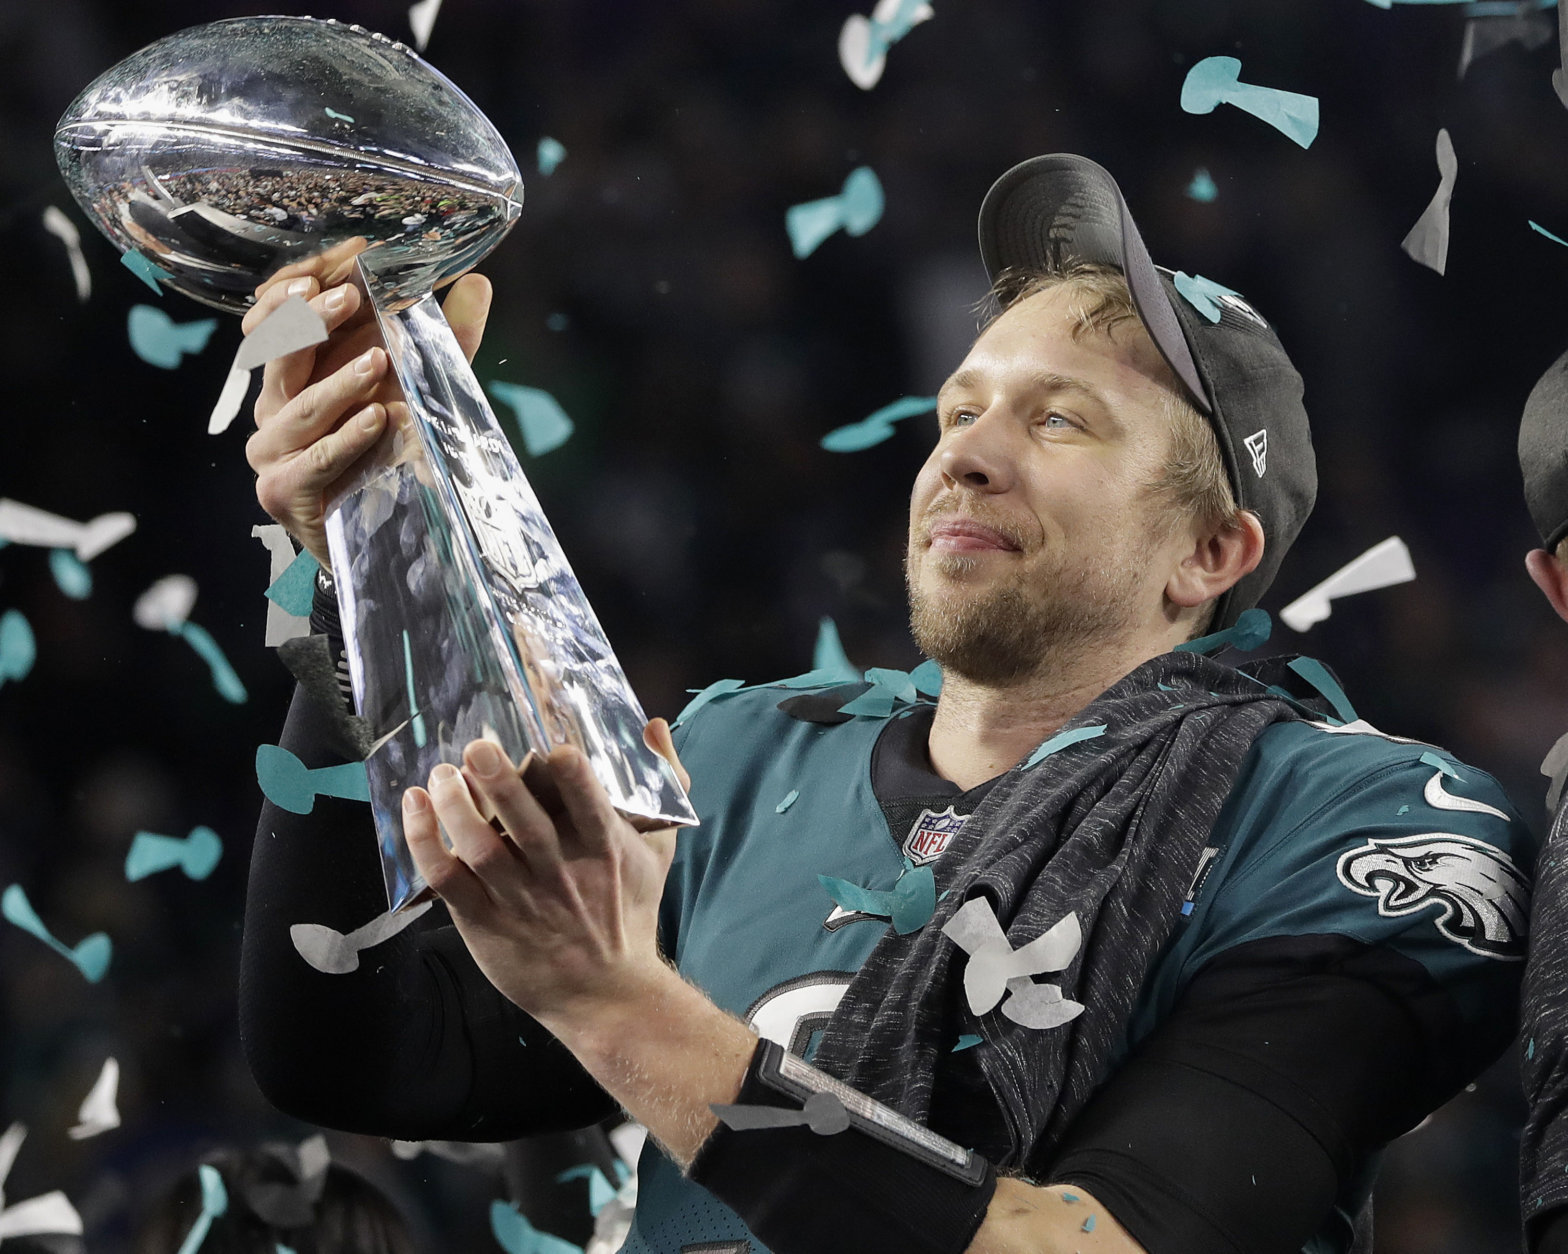 Philadelphia Eagles' Nick Foles holds up the Vince Lombardi Trophy after the NFL Super Bowl 52 football game against the New England Patriots, Sunday, Feb. 4, 2018, in Minneapolis. The Eagles won 41-33. (AP Photo/Matt Slocum)